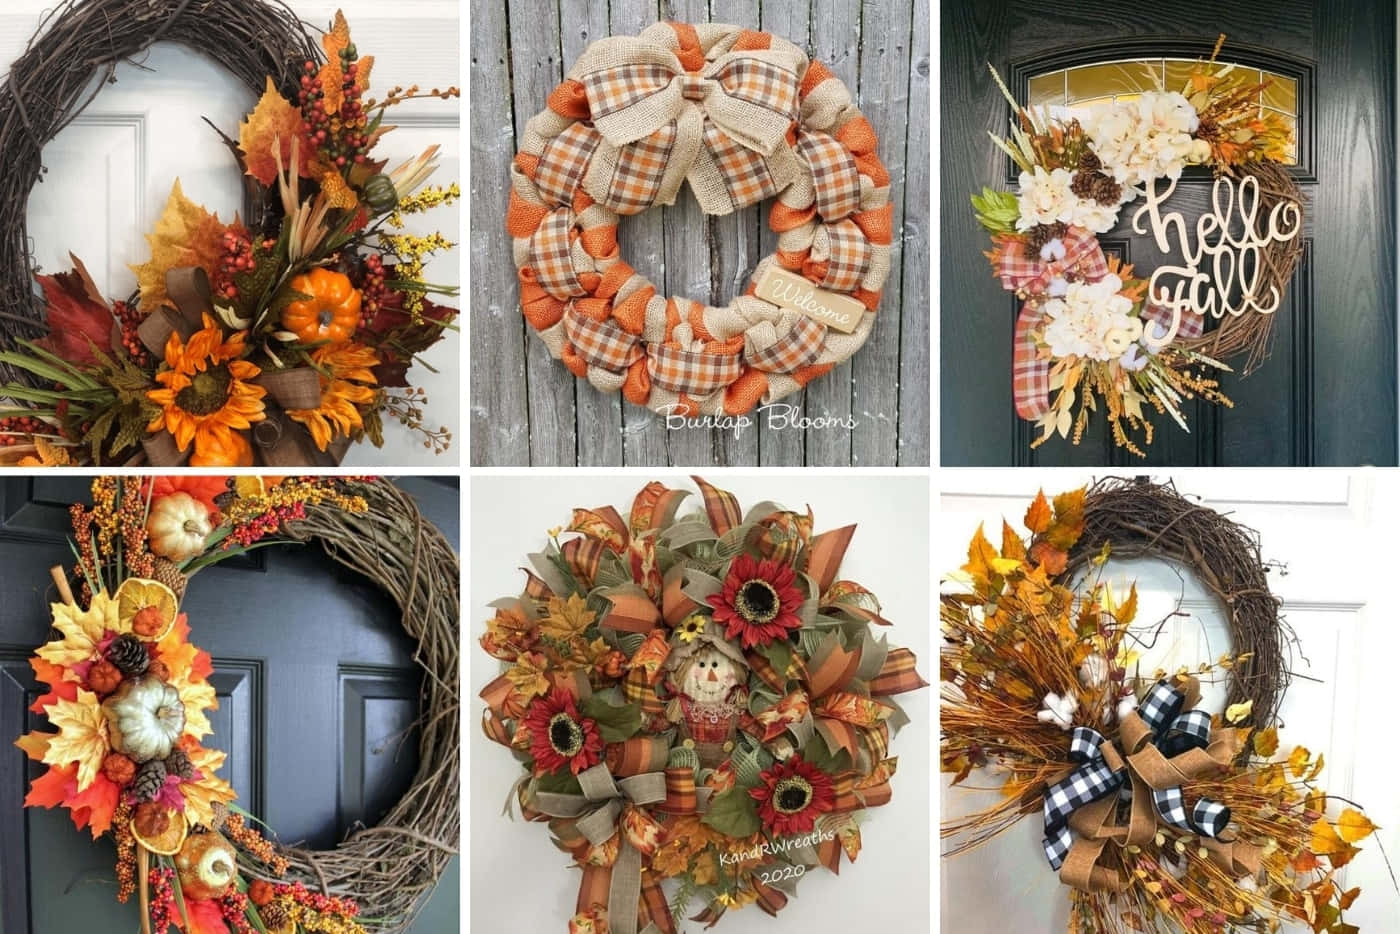 A beautiful fall wreath made from vibrant autumn leaves and seasonal decorations Wallpaper